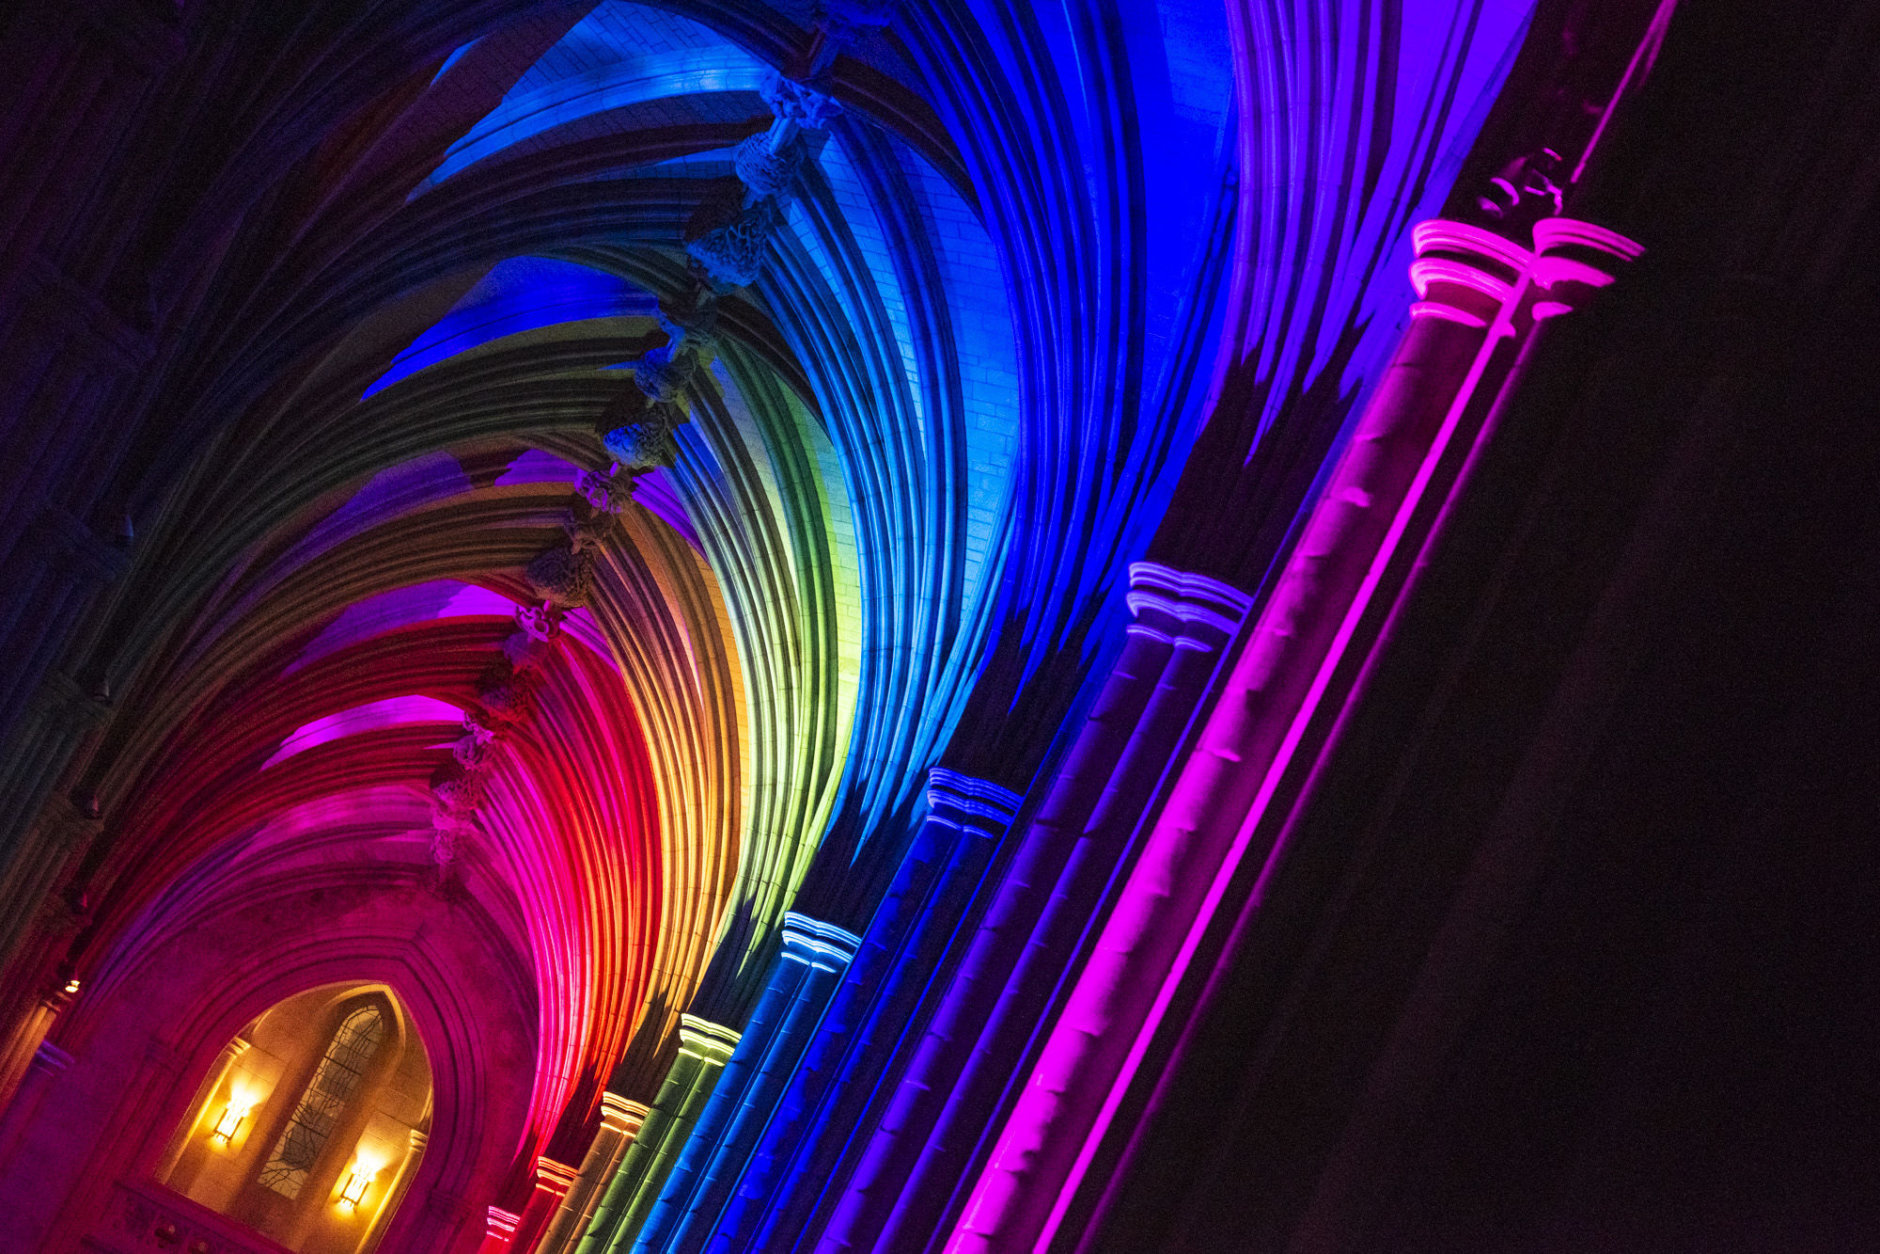 "Space, Light and Sound" bathed the Washington National Cathedral in color Monday night. (Courtesy Washington National Cathedral/Danielle E. Thomas)